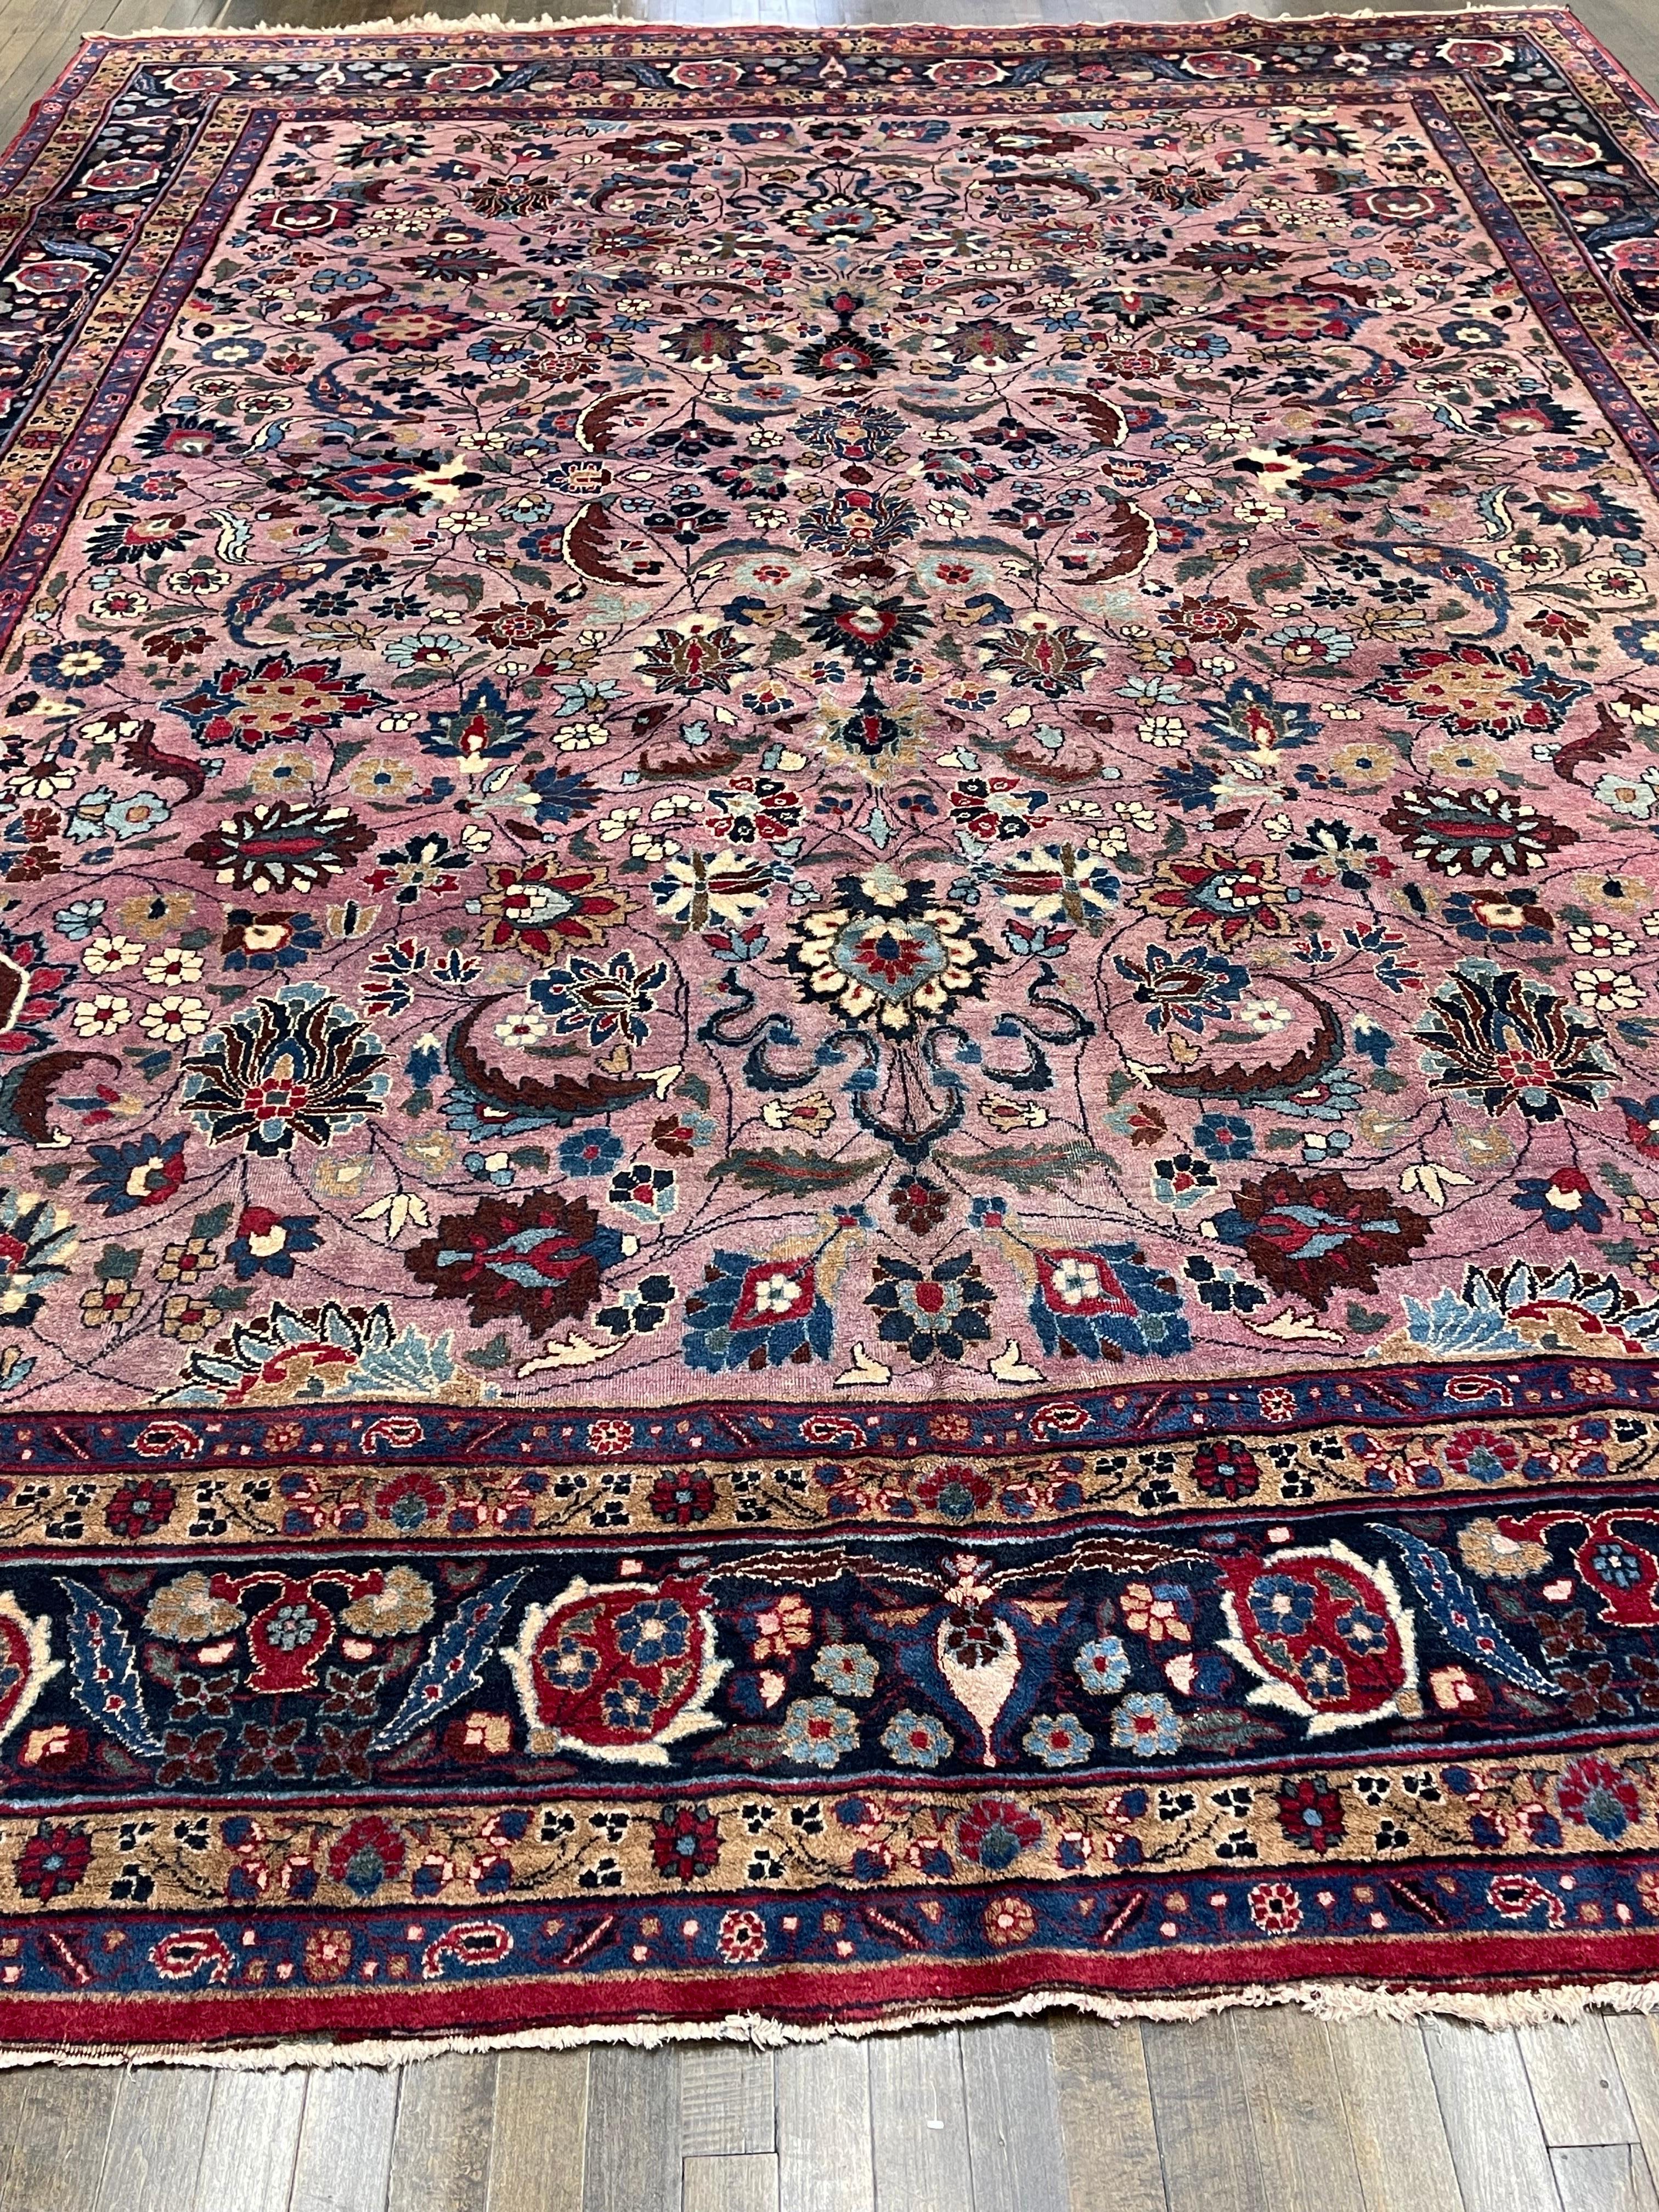 A rare beauty with a unique purple field,this rug is handwoven in Khorasan province, possibly in the city of Mashad. The principal motif of the carpet is inspired by the well known design of the rose of Isfahan.

 Although the creation of